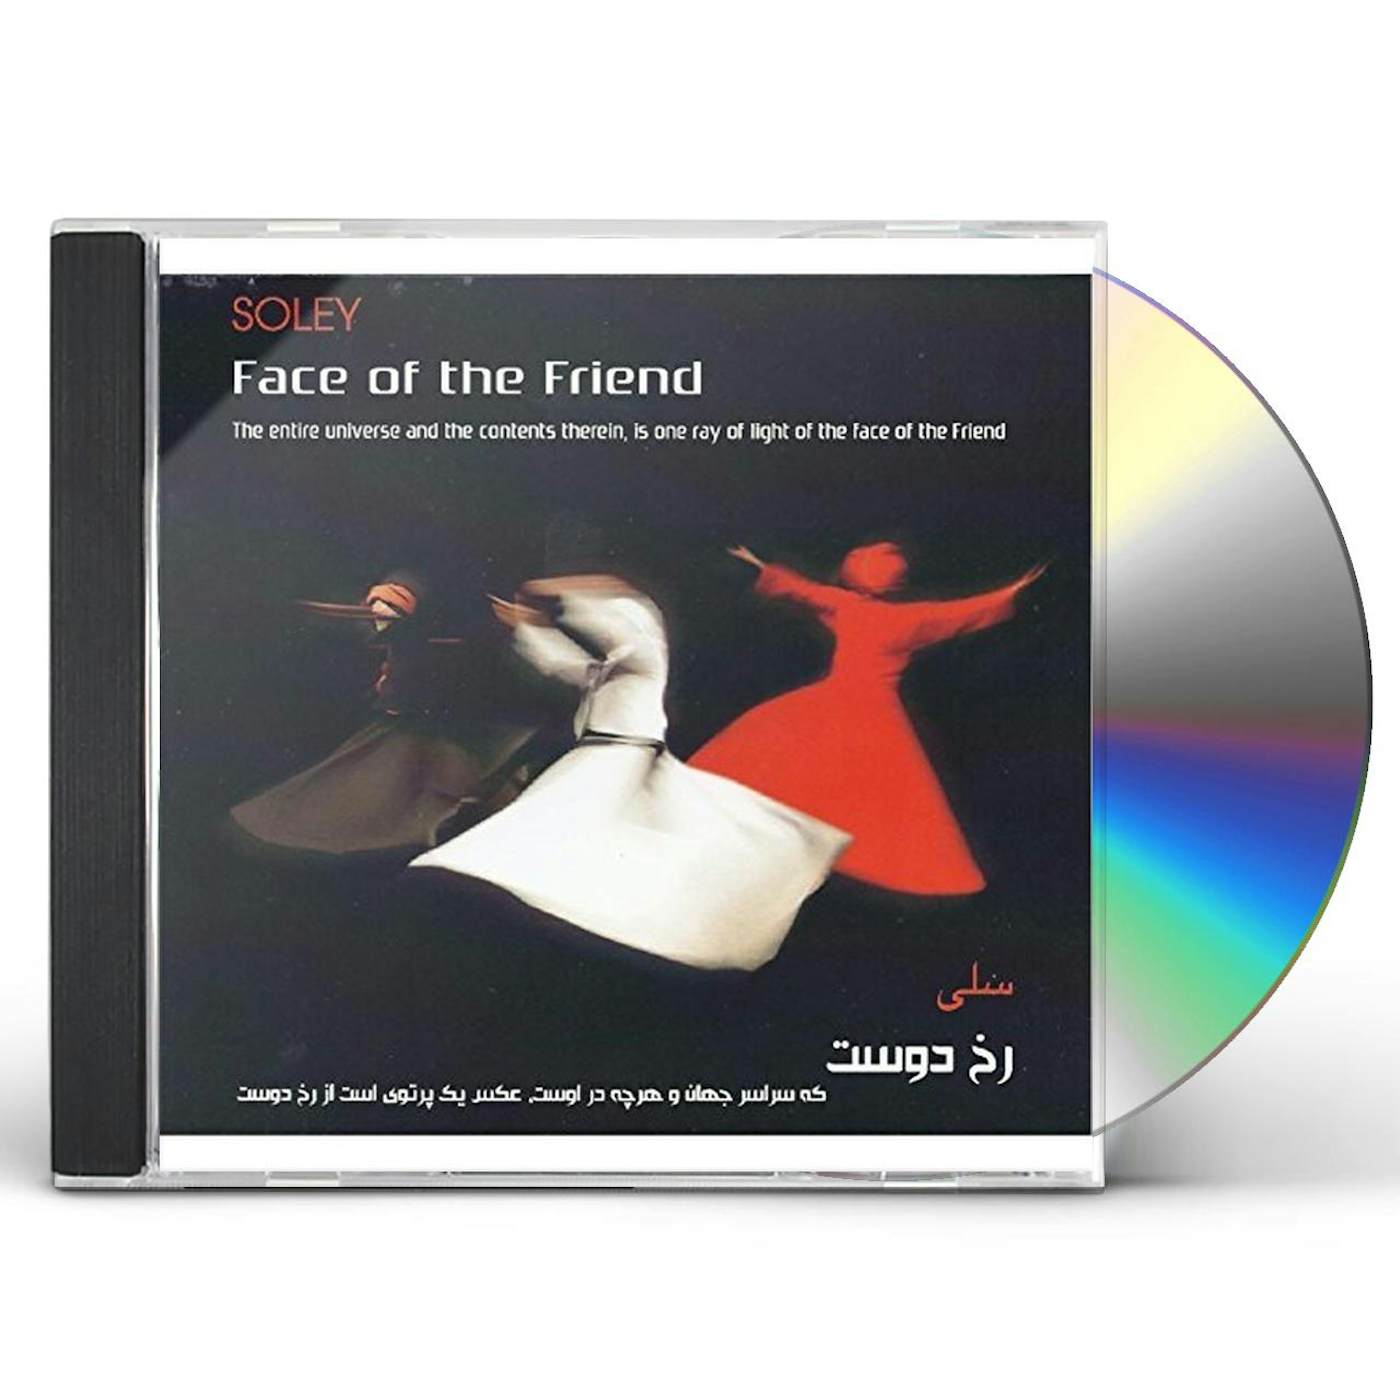 Sóley FACE OF THE FRIEND CD